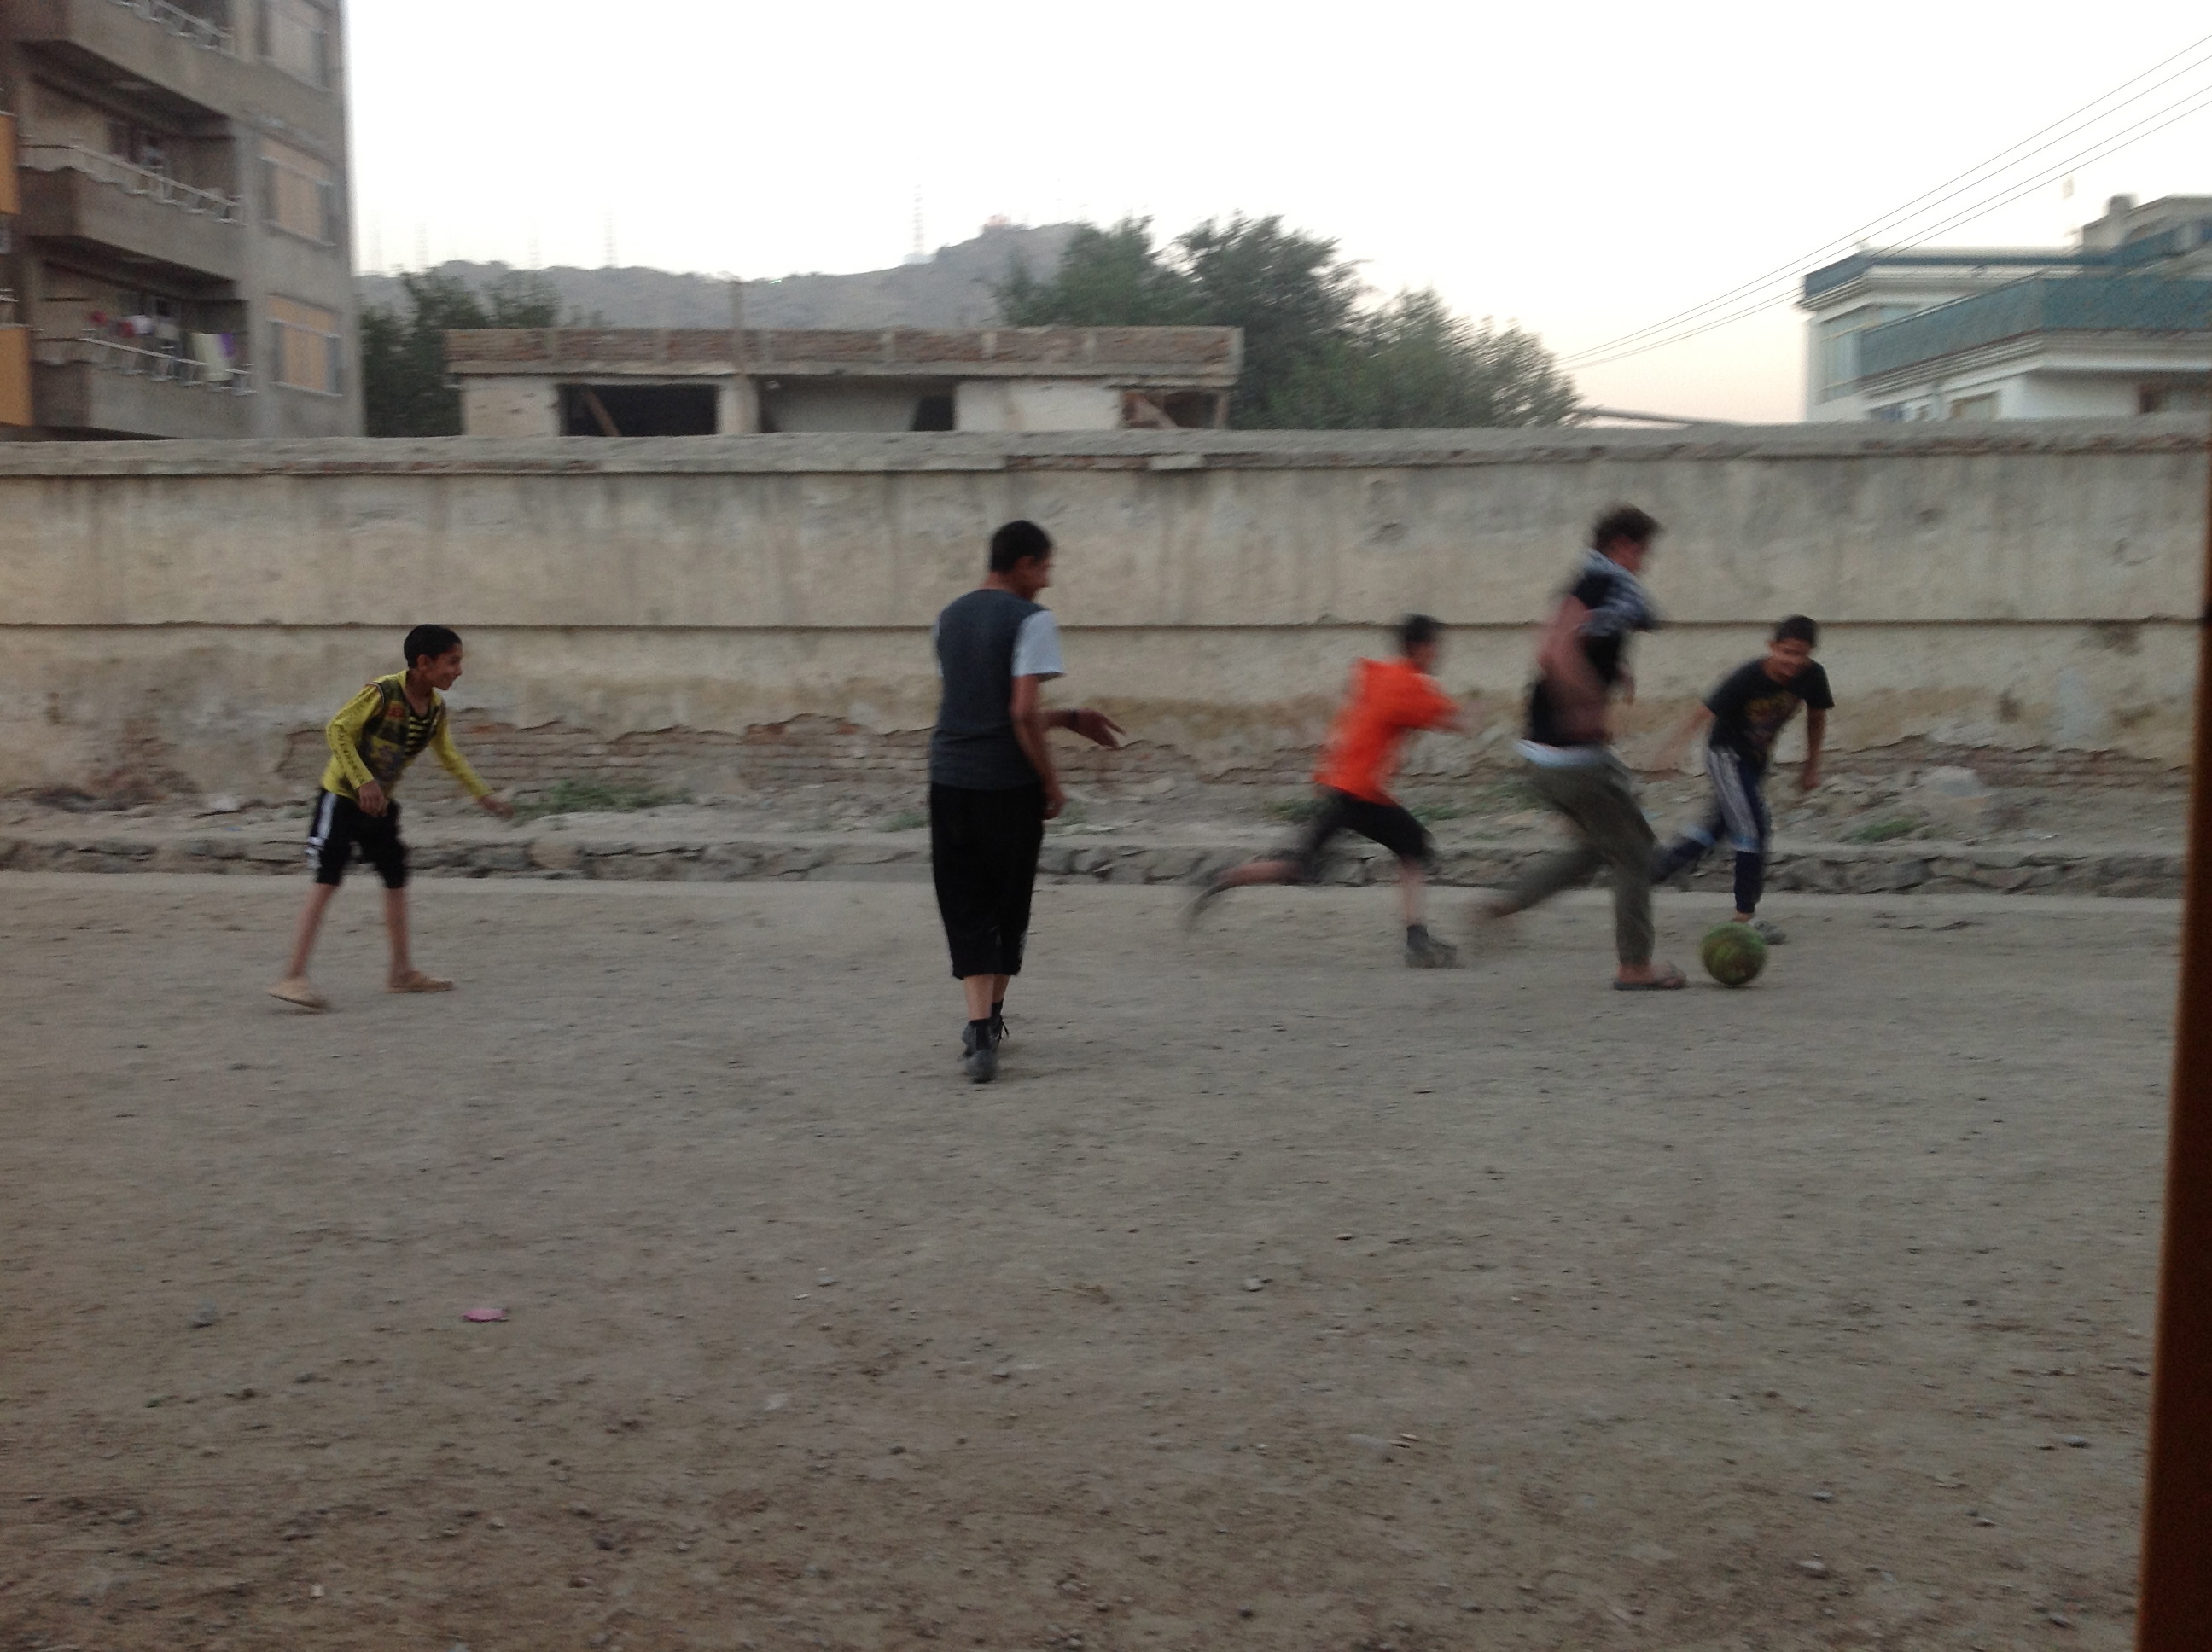 Boys playing soccer in the road